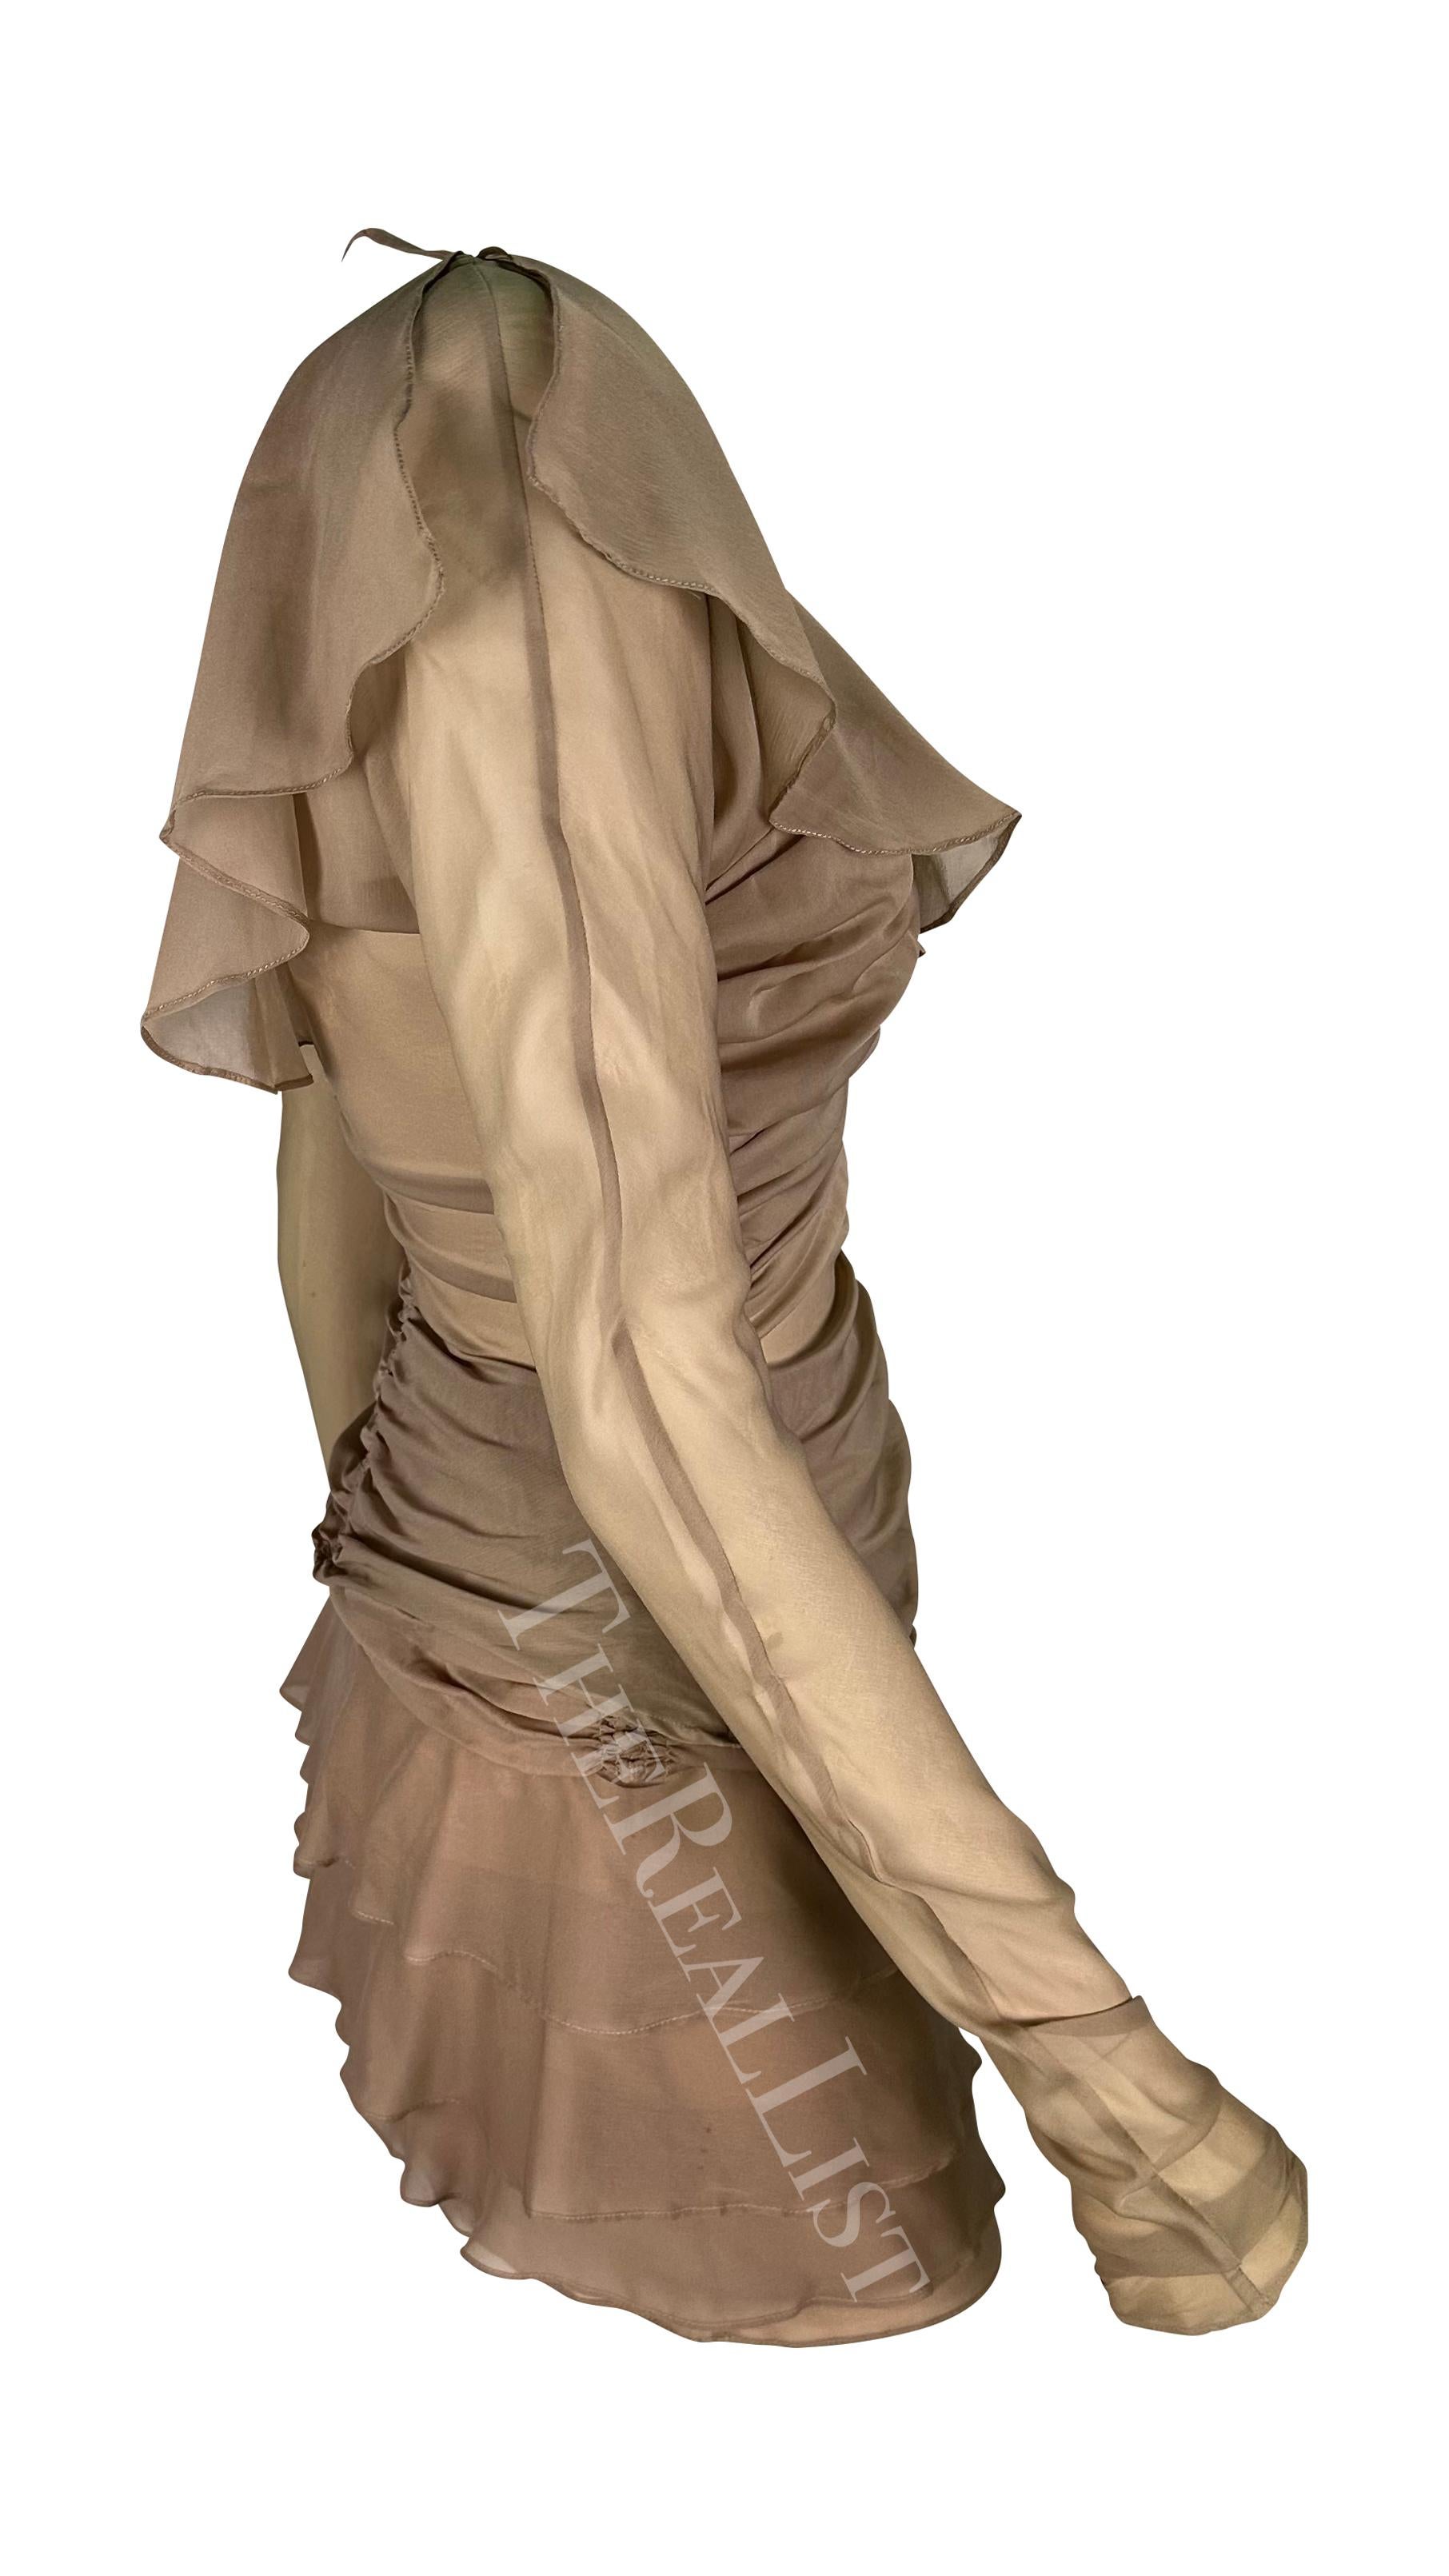 S/S 2003 Gucci by Tom Ford Dusty Pink Beige Sheer Chiffon Ruffle Skirt Set For Sale 6